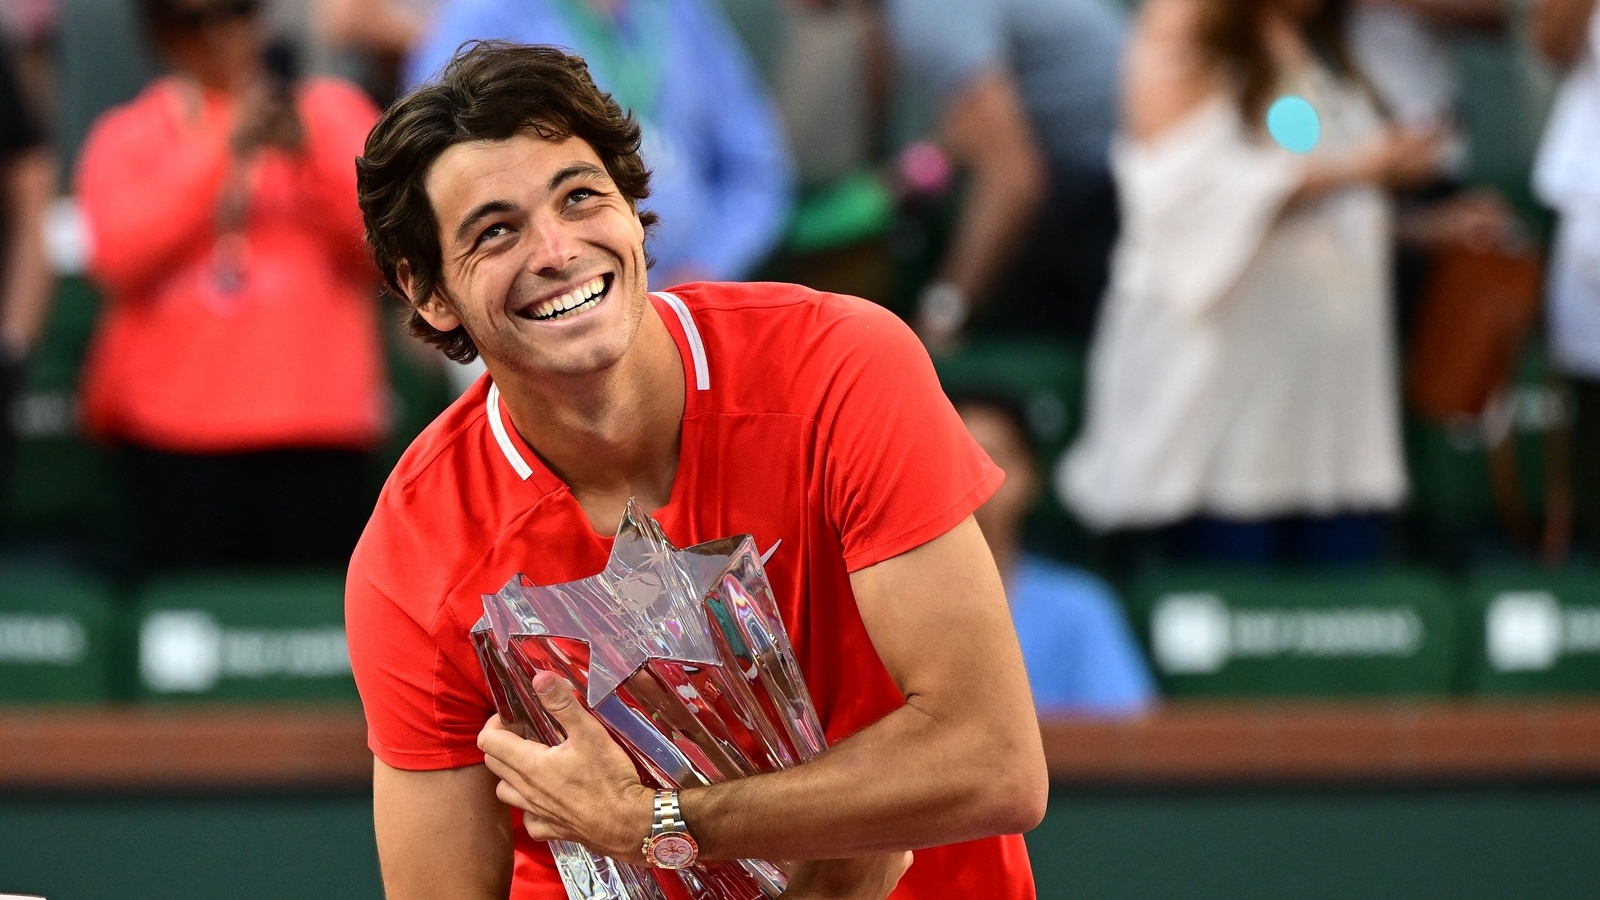 Wounded Taylor Fritz ends Rafael Nadal win streak to lift Indian Wells